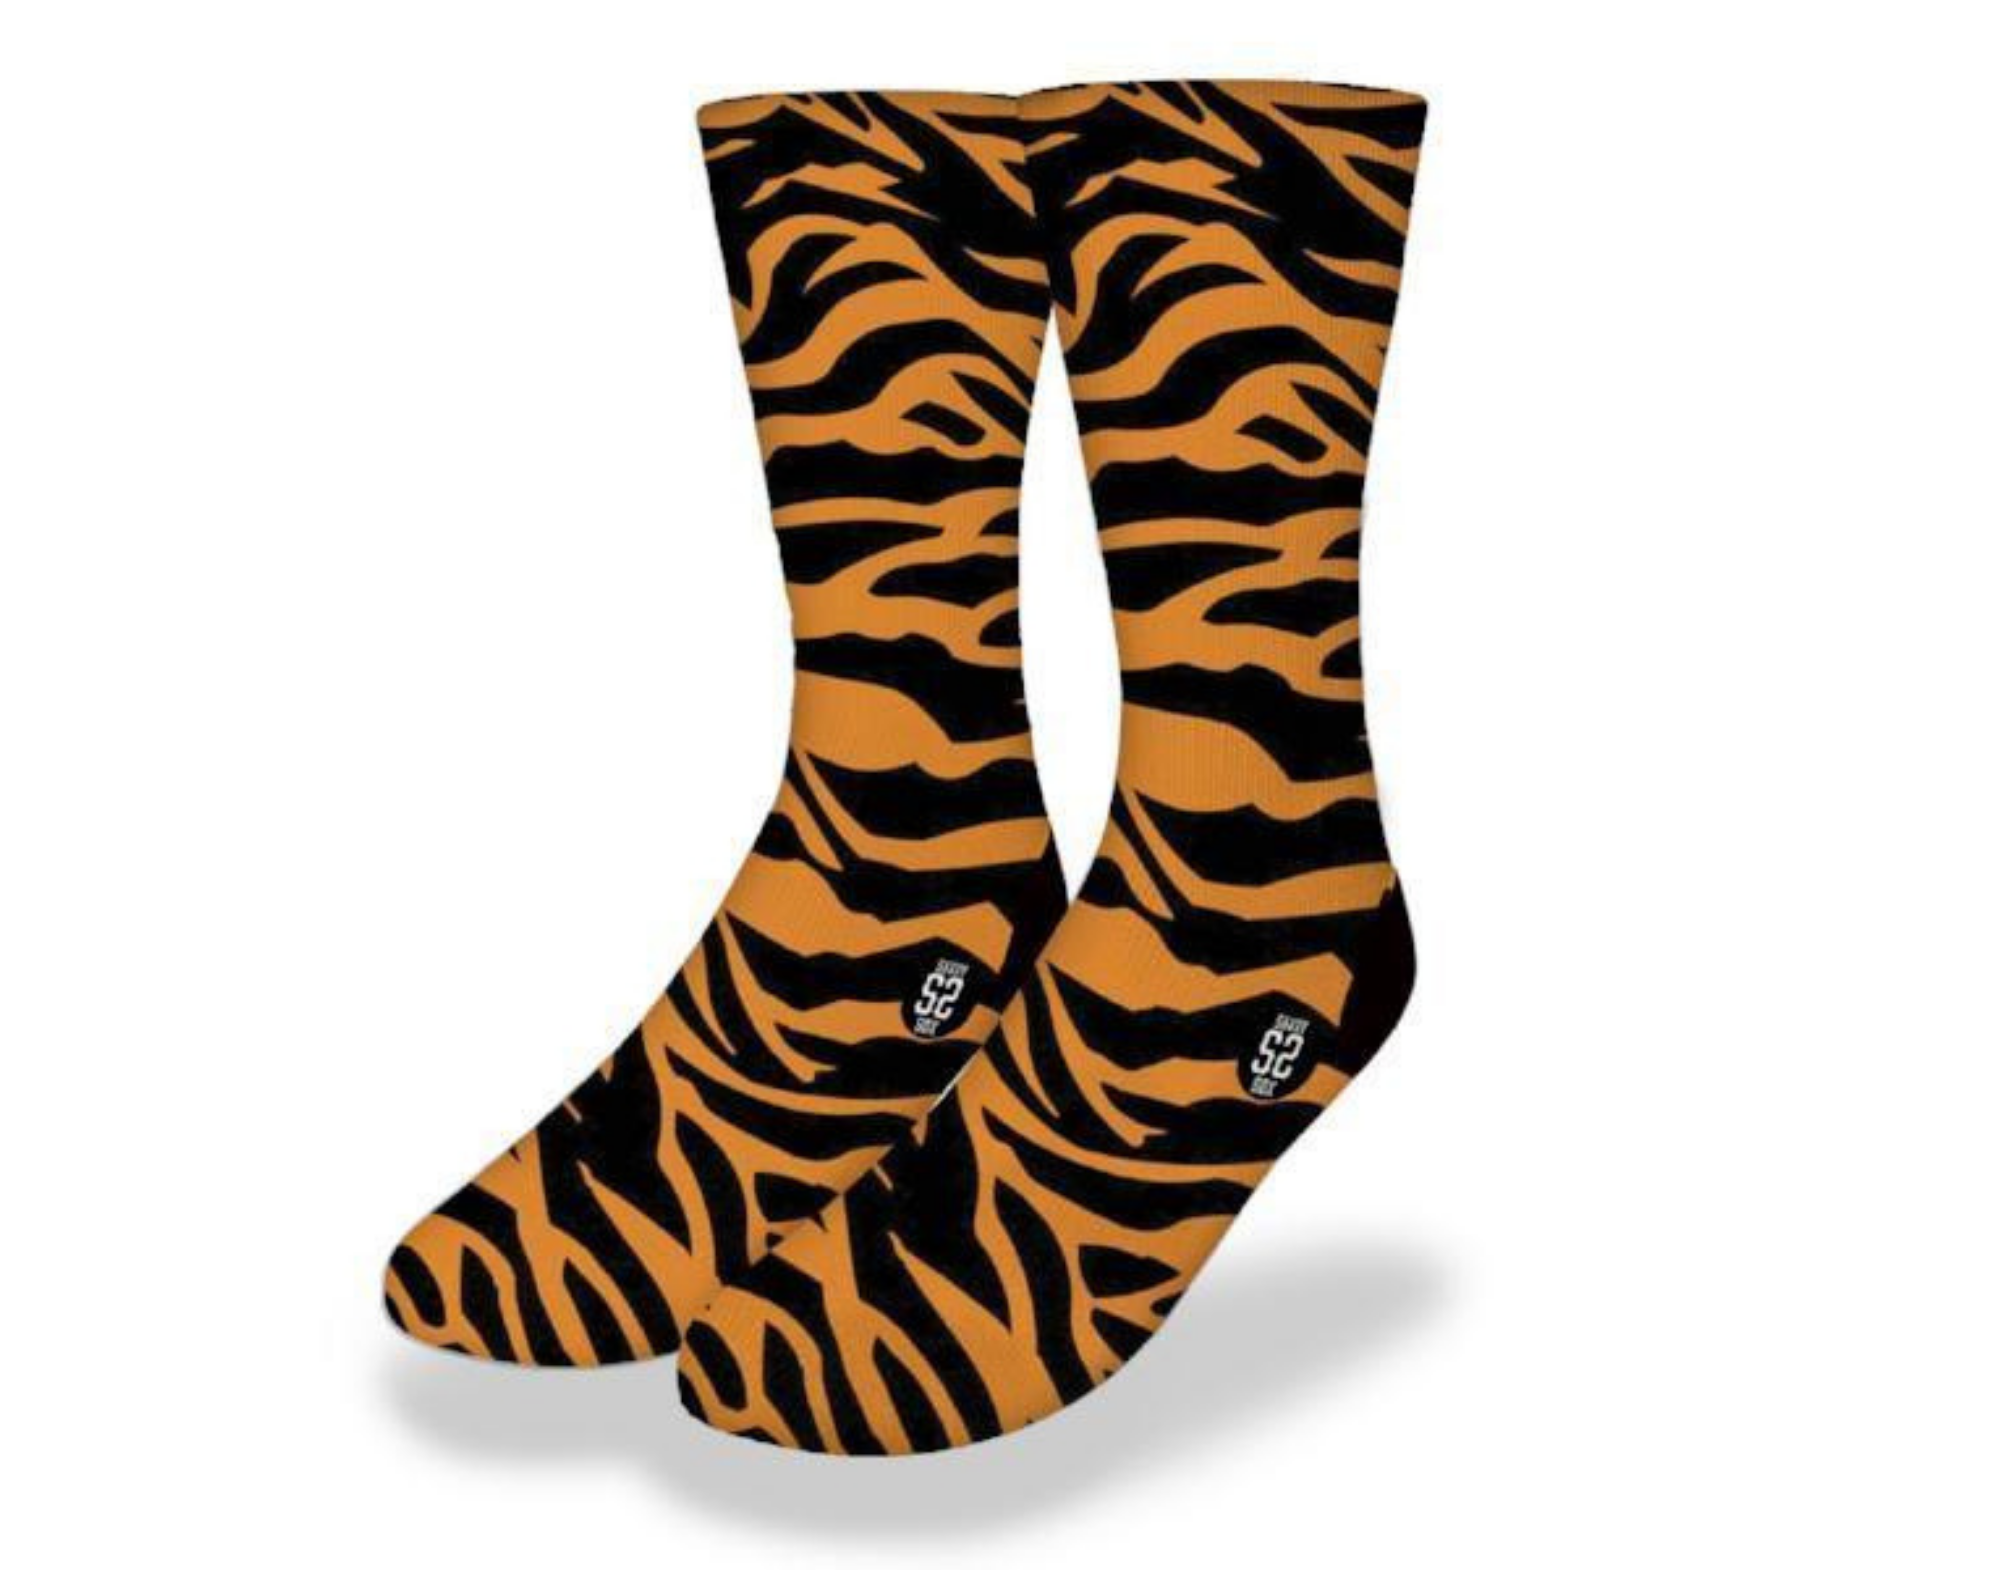 Tiger print socks with roaring tiger - Collections